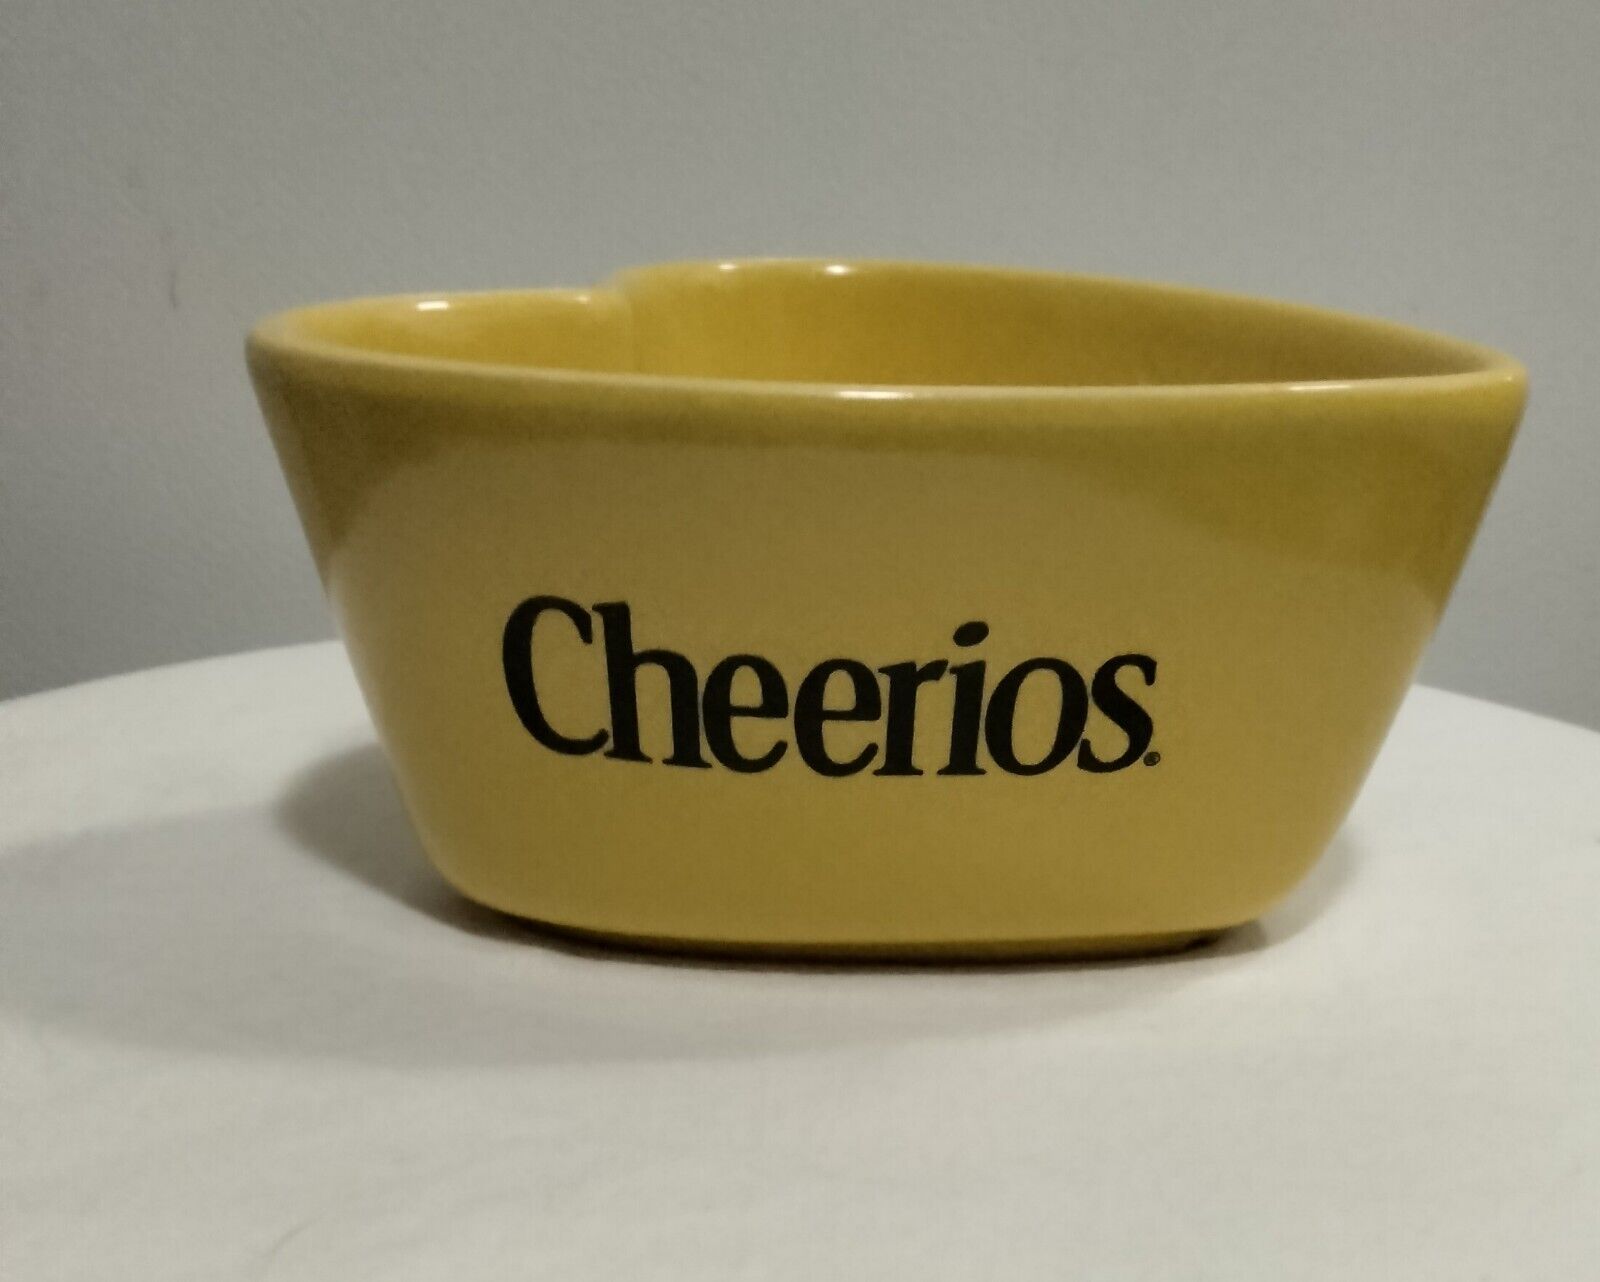 2003 Cheerios Heart Shaped Yellow Bowl Ceramic General Mills Collectible Cereal